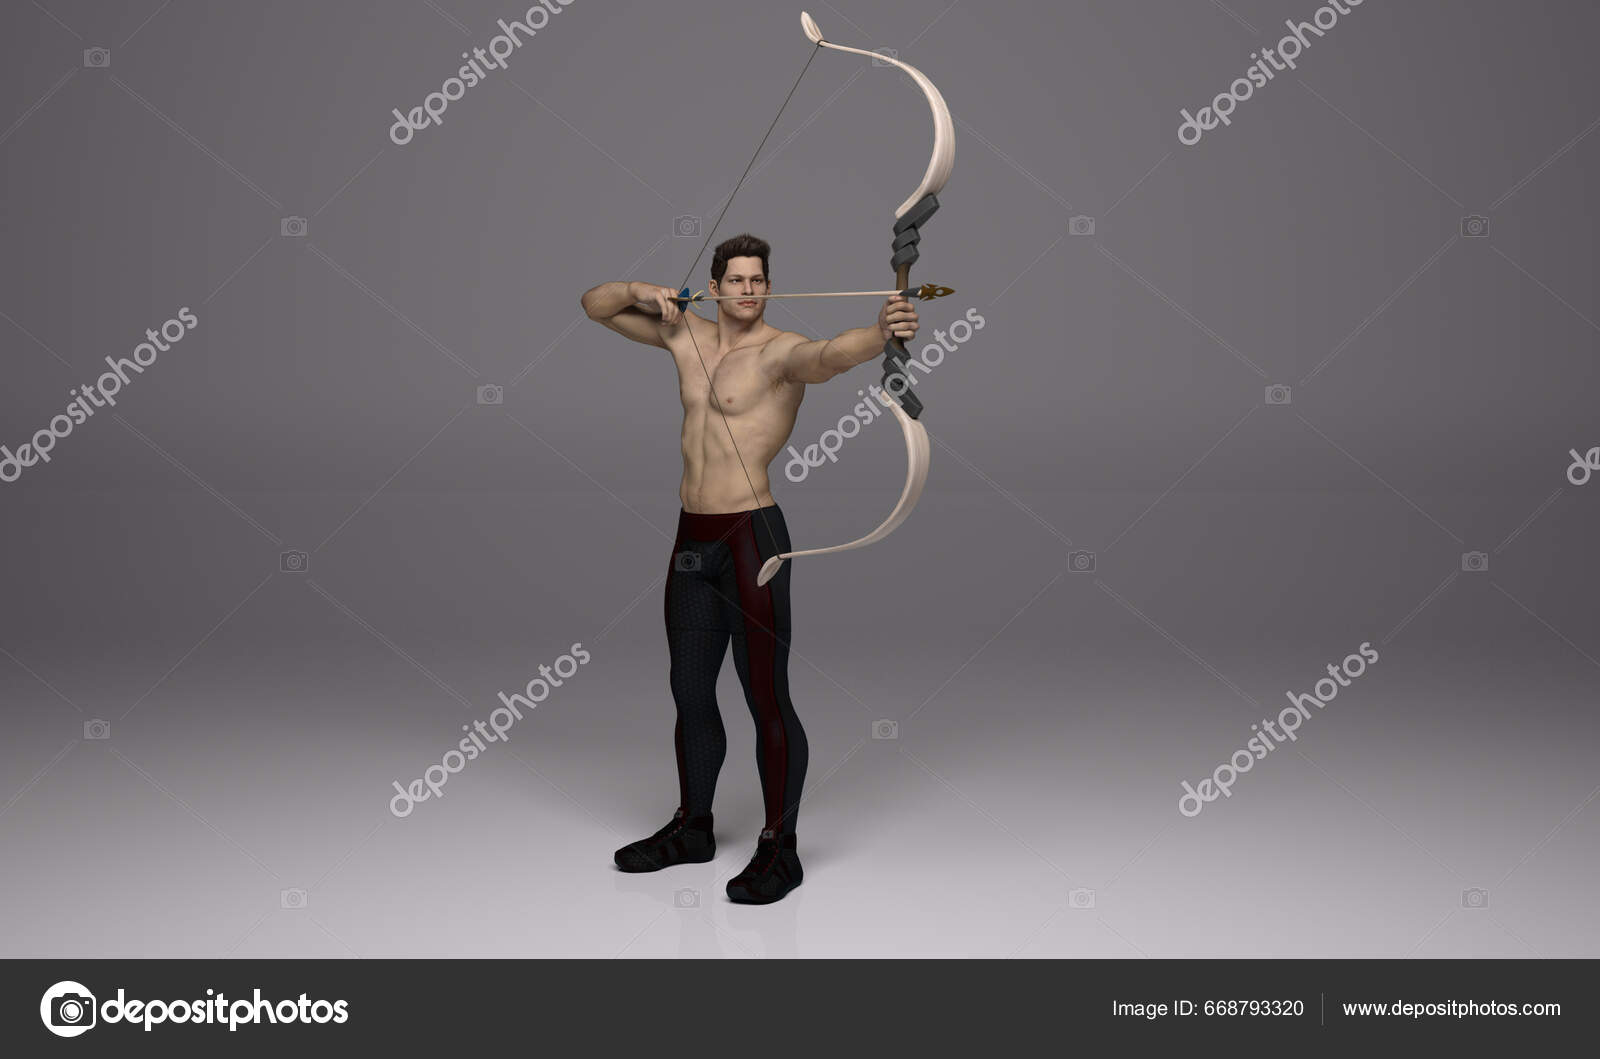 Bow And Arrow Pose Reference | carrosone.be